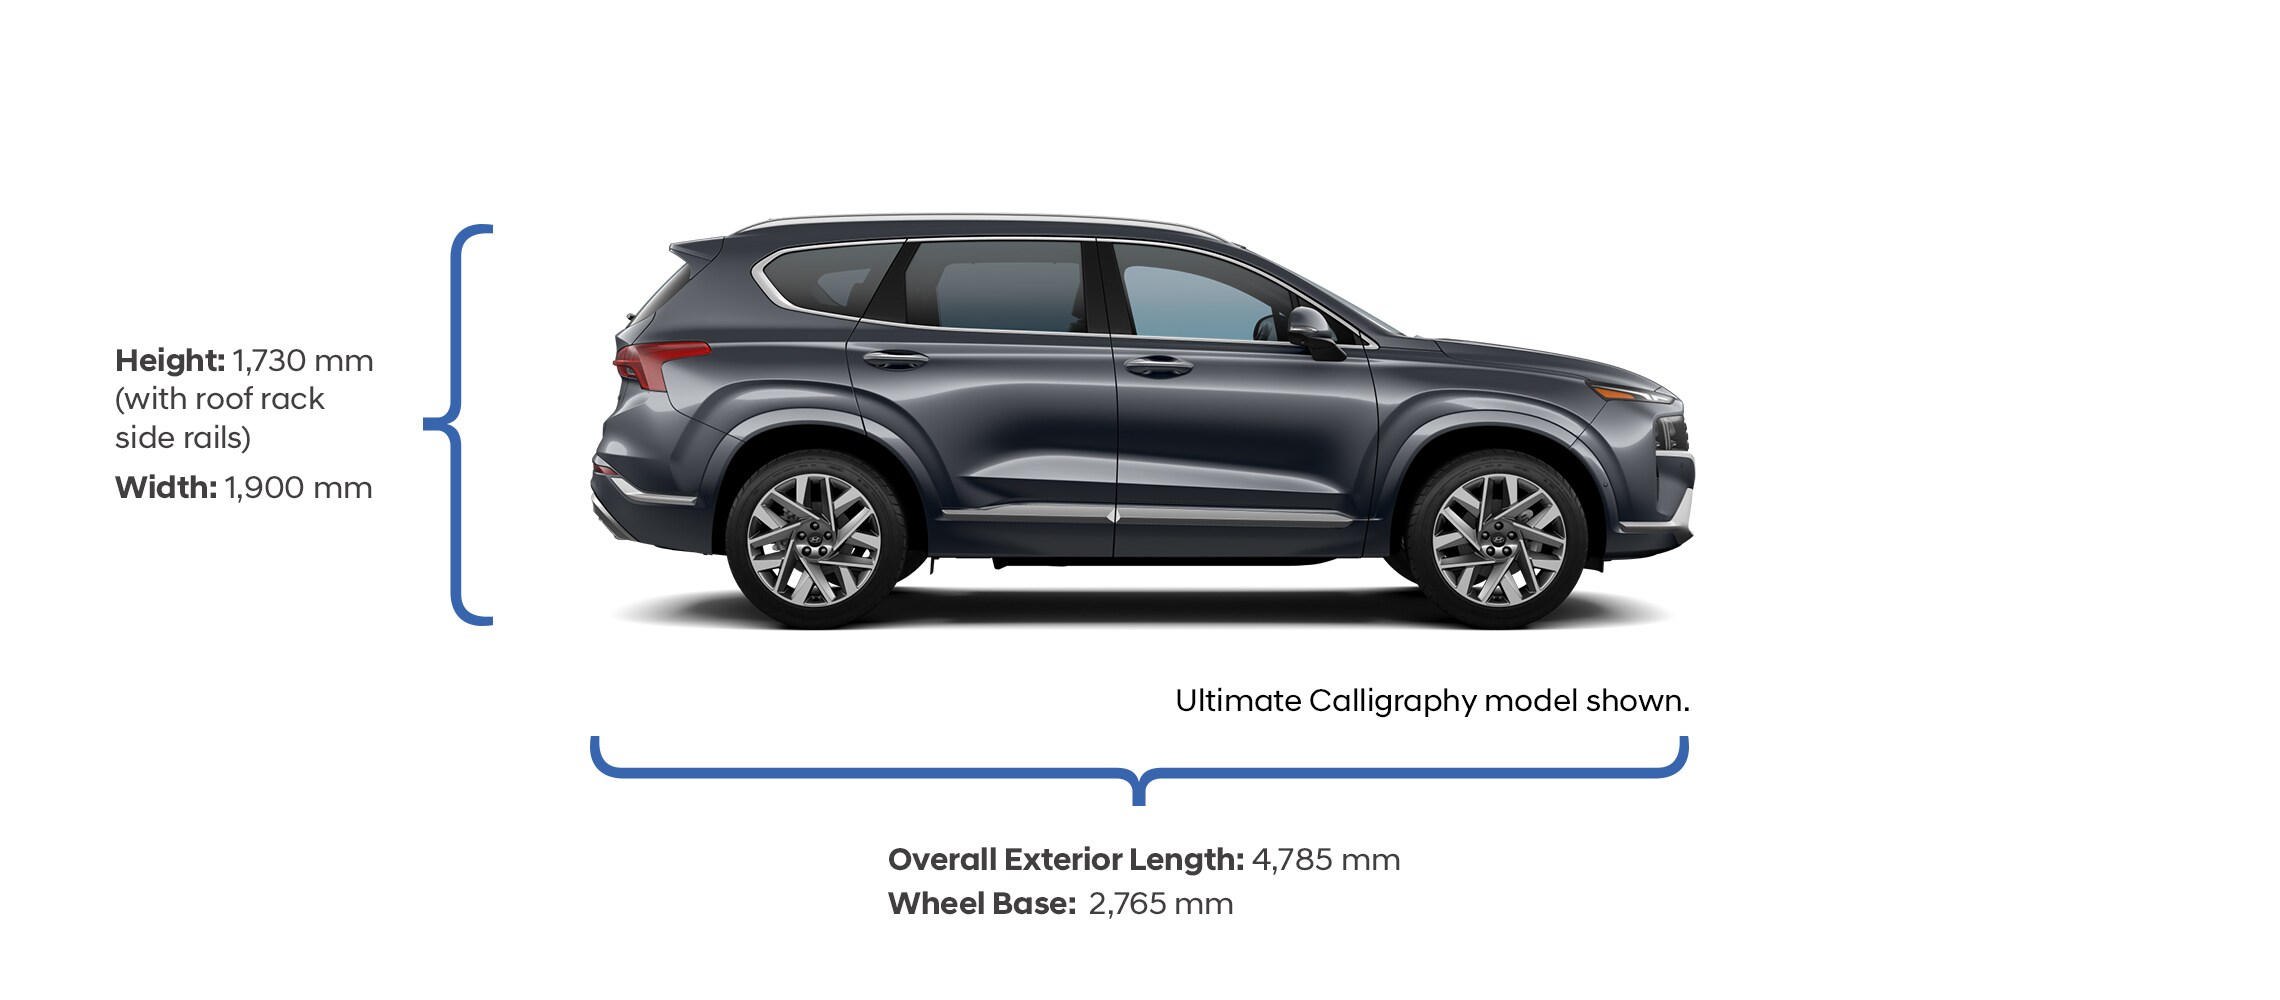 Height and width specifications of the 2022 Santa Fe